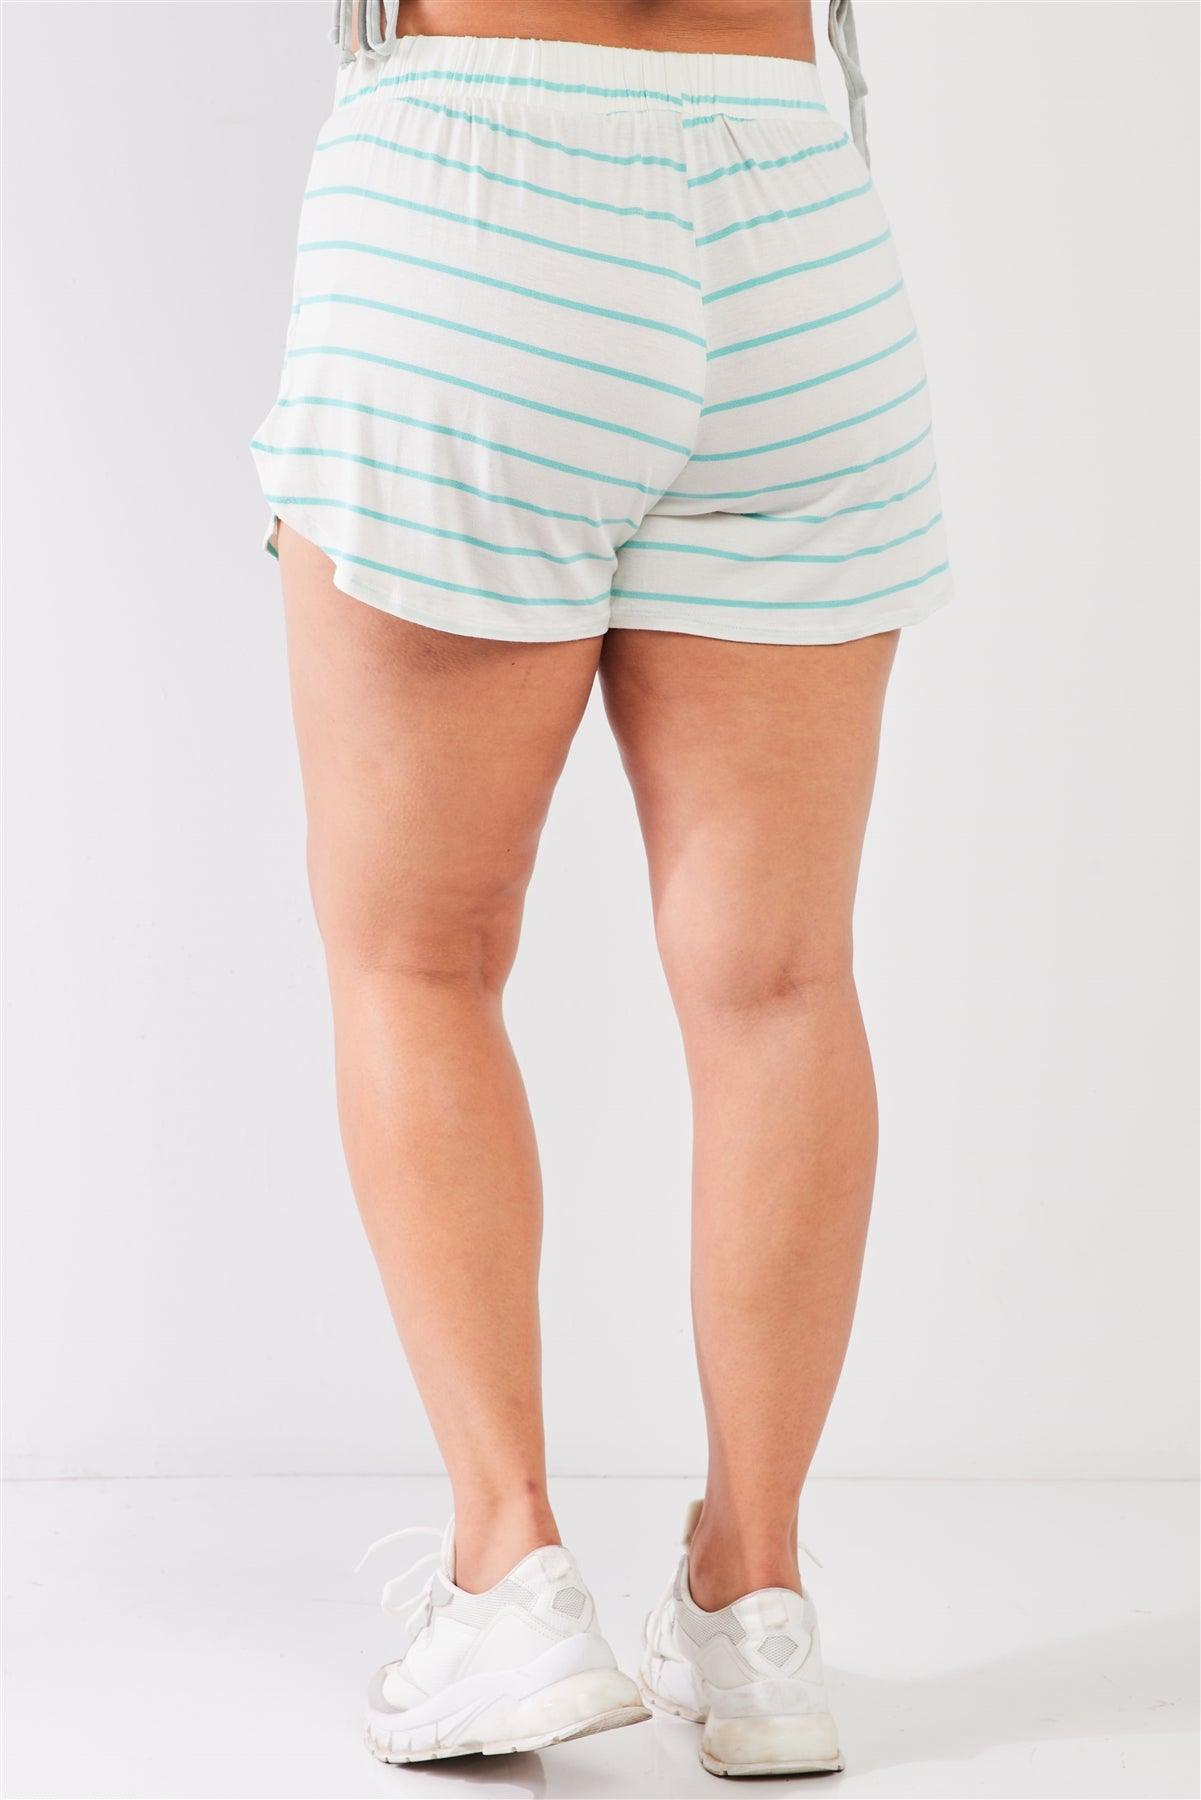 Junior Plus Size Ivory-Mint Striped High Waist Split Sides Relaxed Lounge Mini Shorts